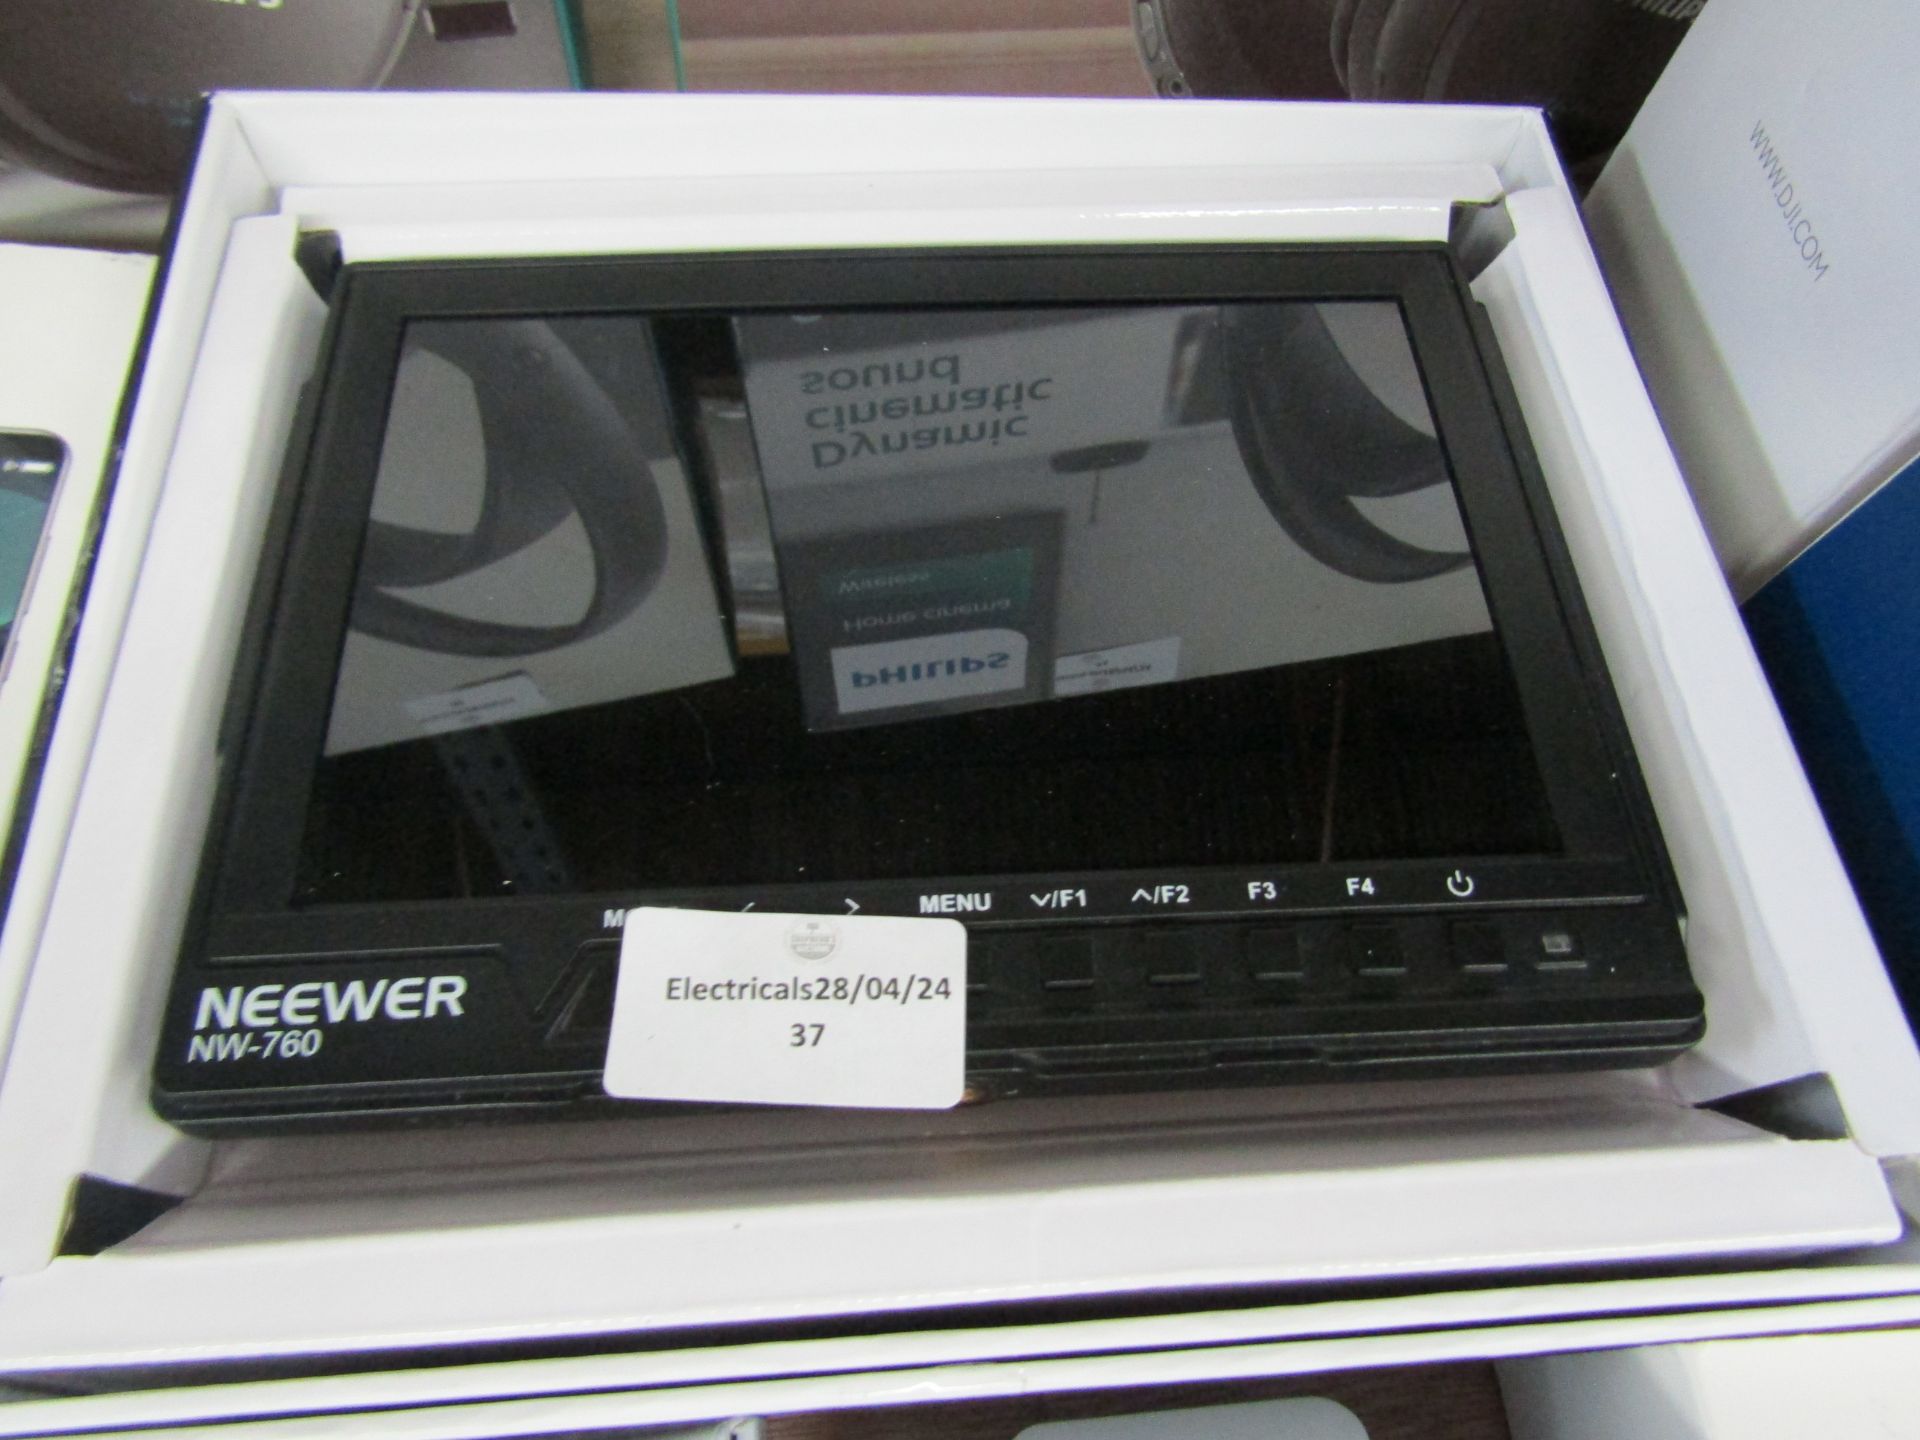 Neewer NW-760 7" Full HD 1920 x 1200 Field Monitor - Unchecked & Boxed - RRP CIRCA £149.99